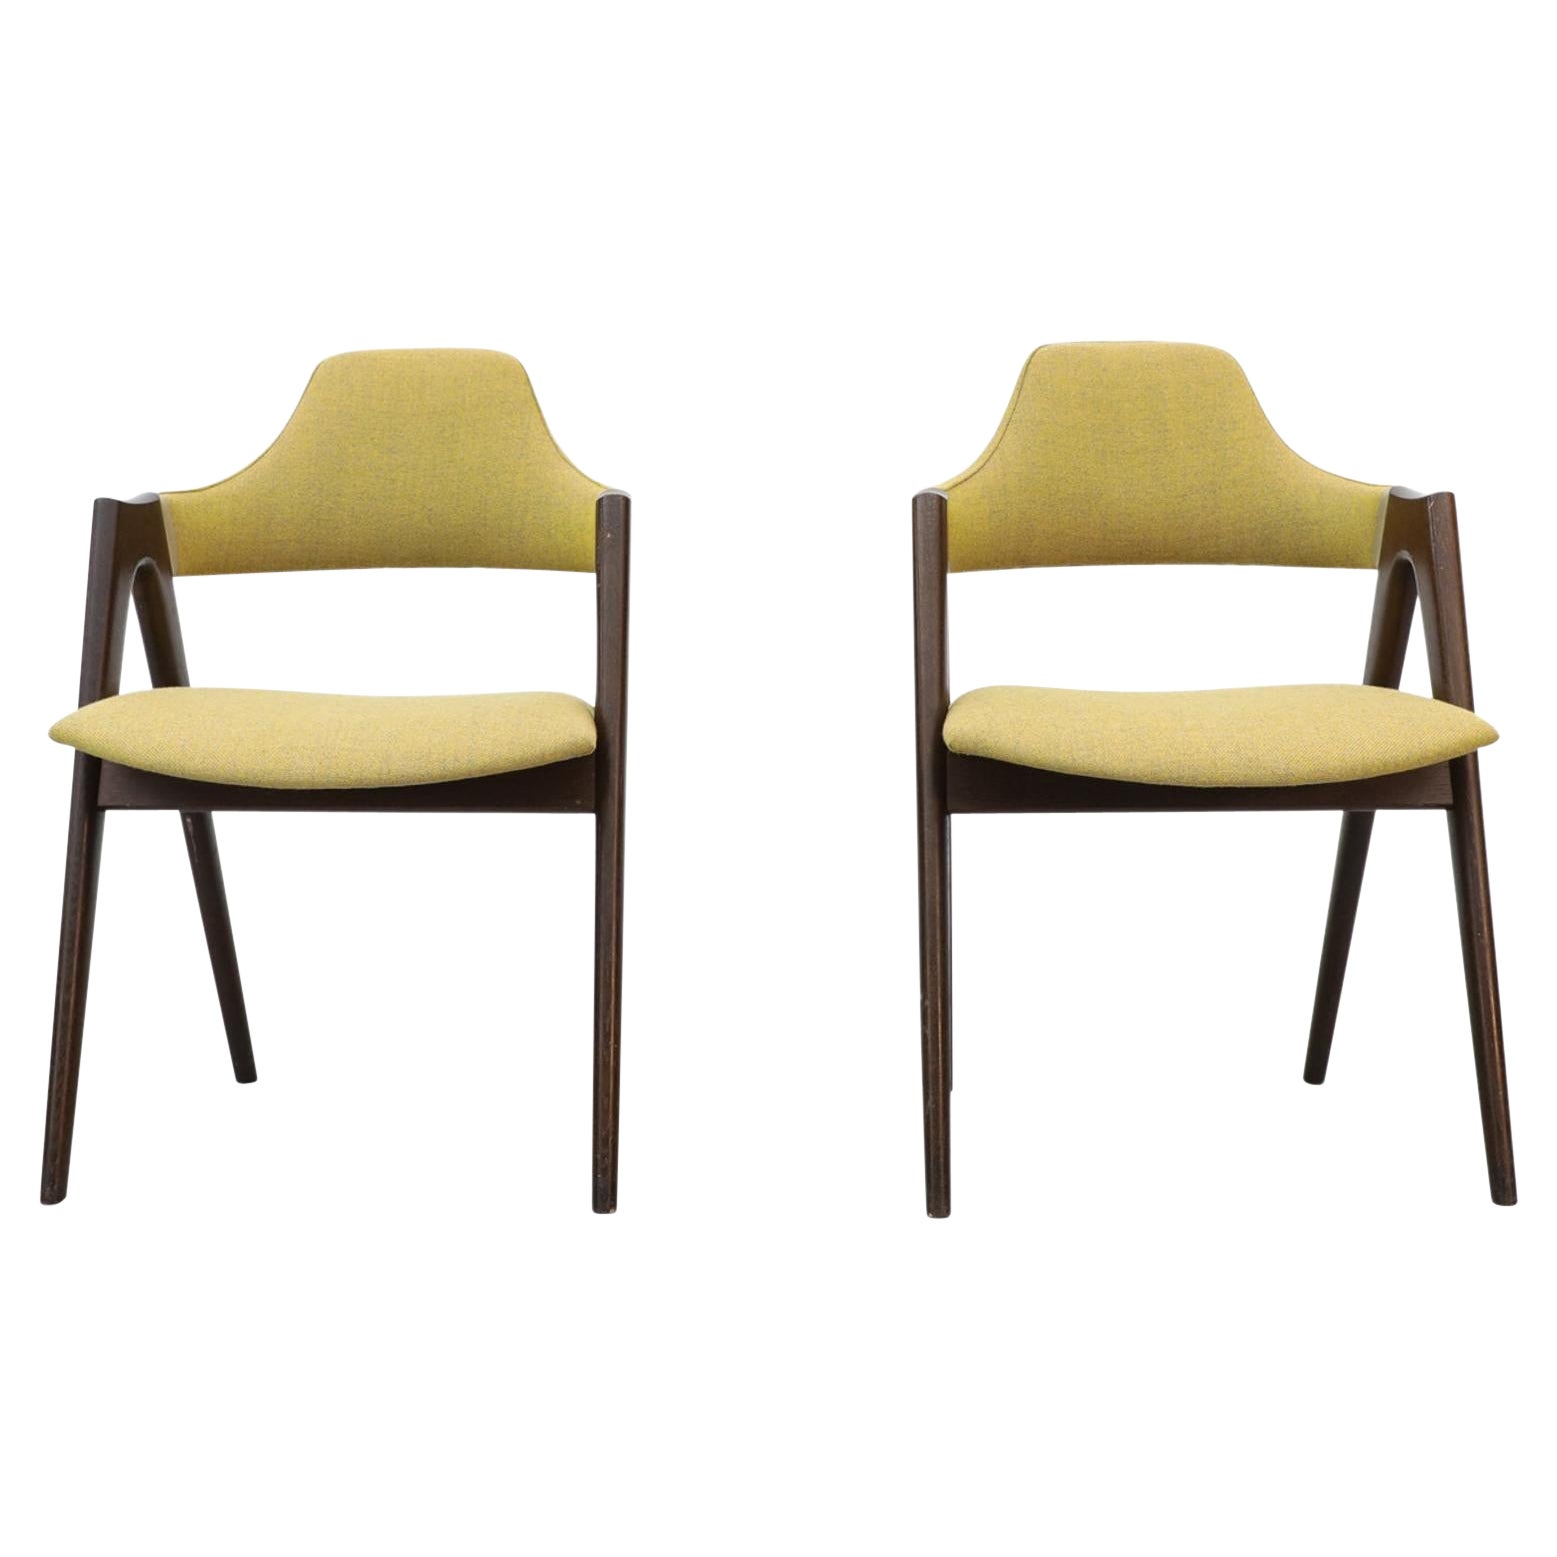 Pair of Kai Kristiansen Dark Stained Wood Framed Compass Chairs in Kiwi Fabric